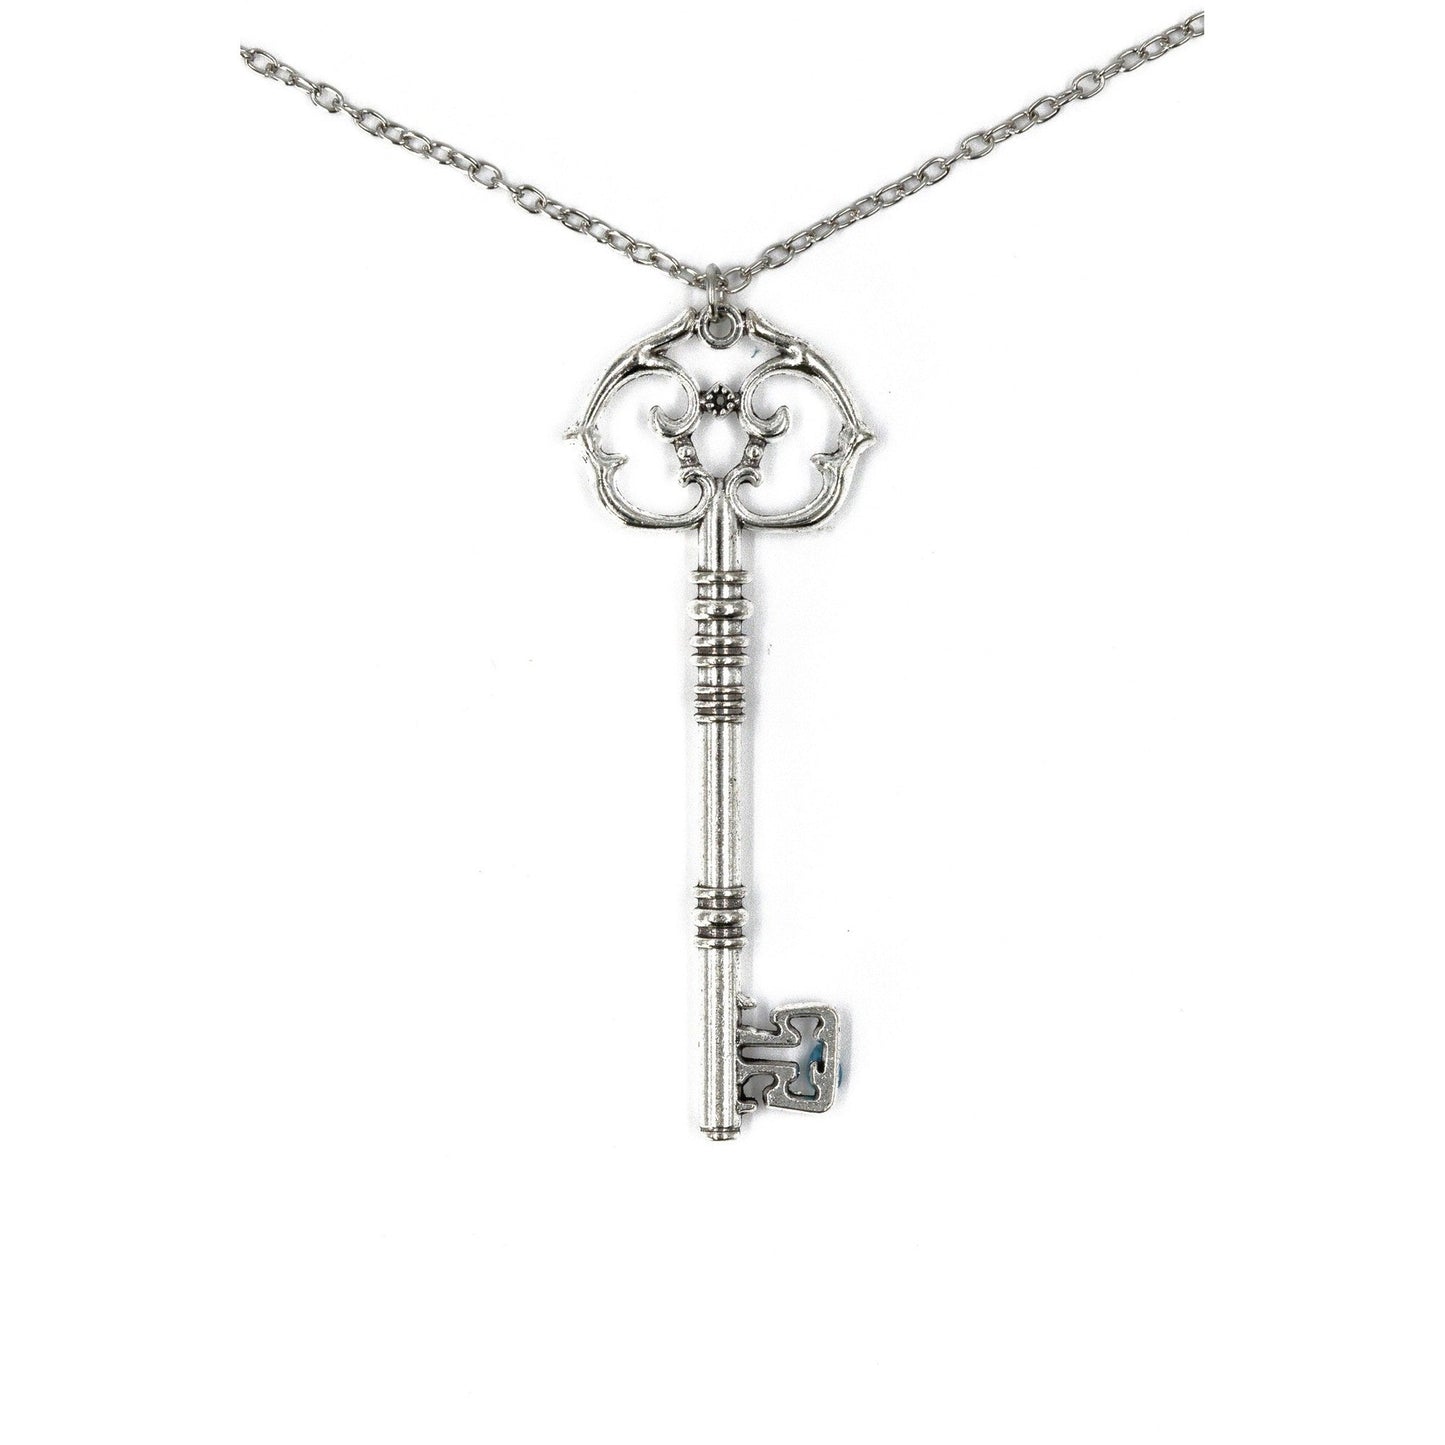 Antique Key Pendant Necklace in Gift Box (Aged Brass Tone or Silver)